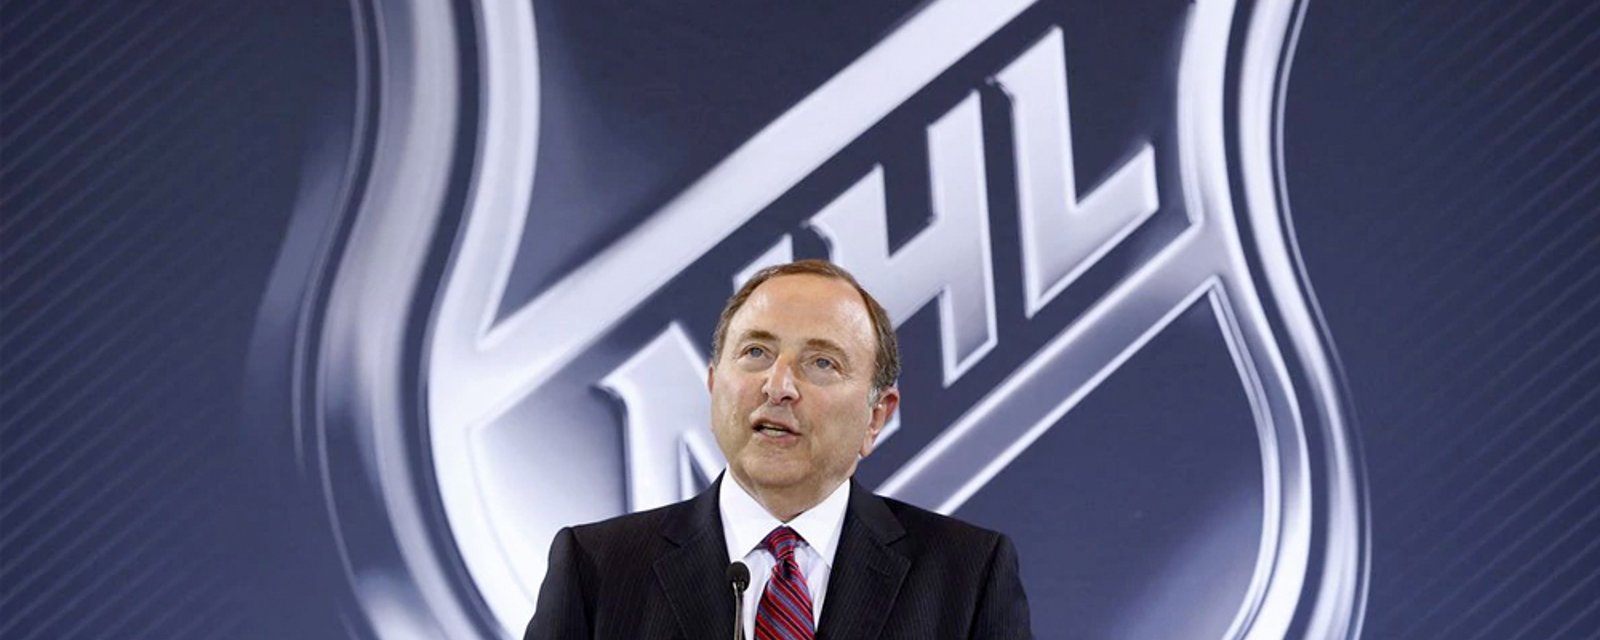 Players who violate NHL’s “bubble” rules will face still penalties